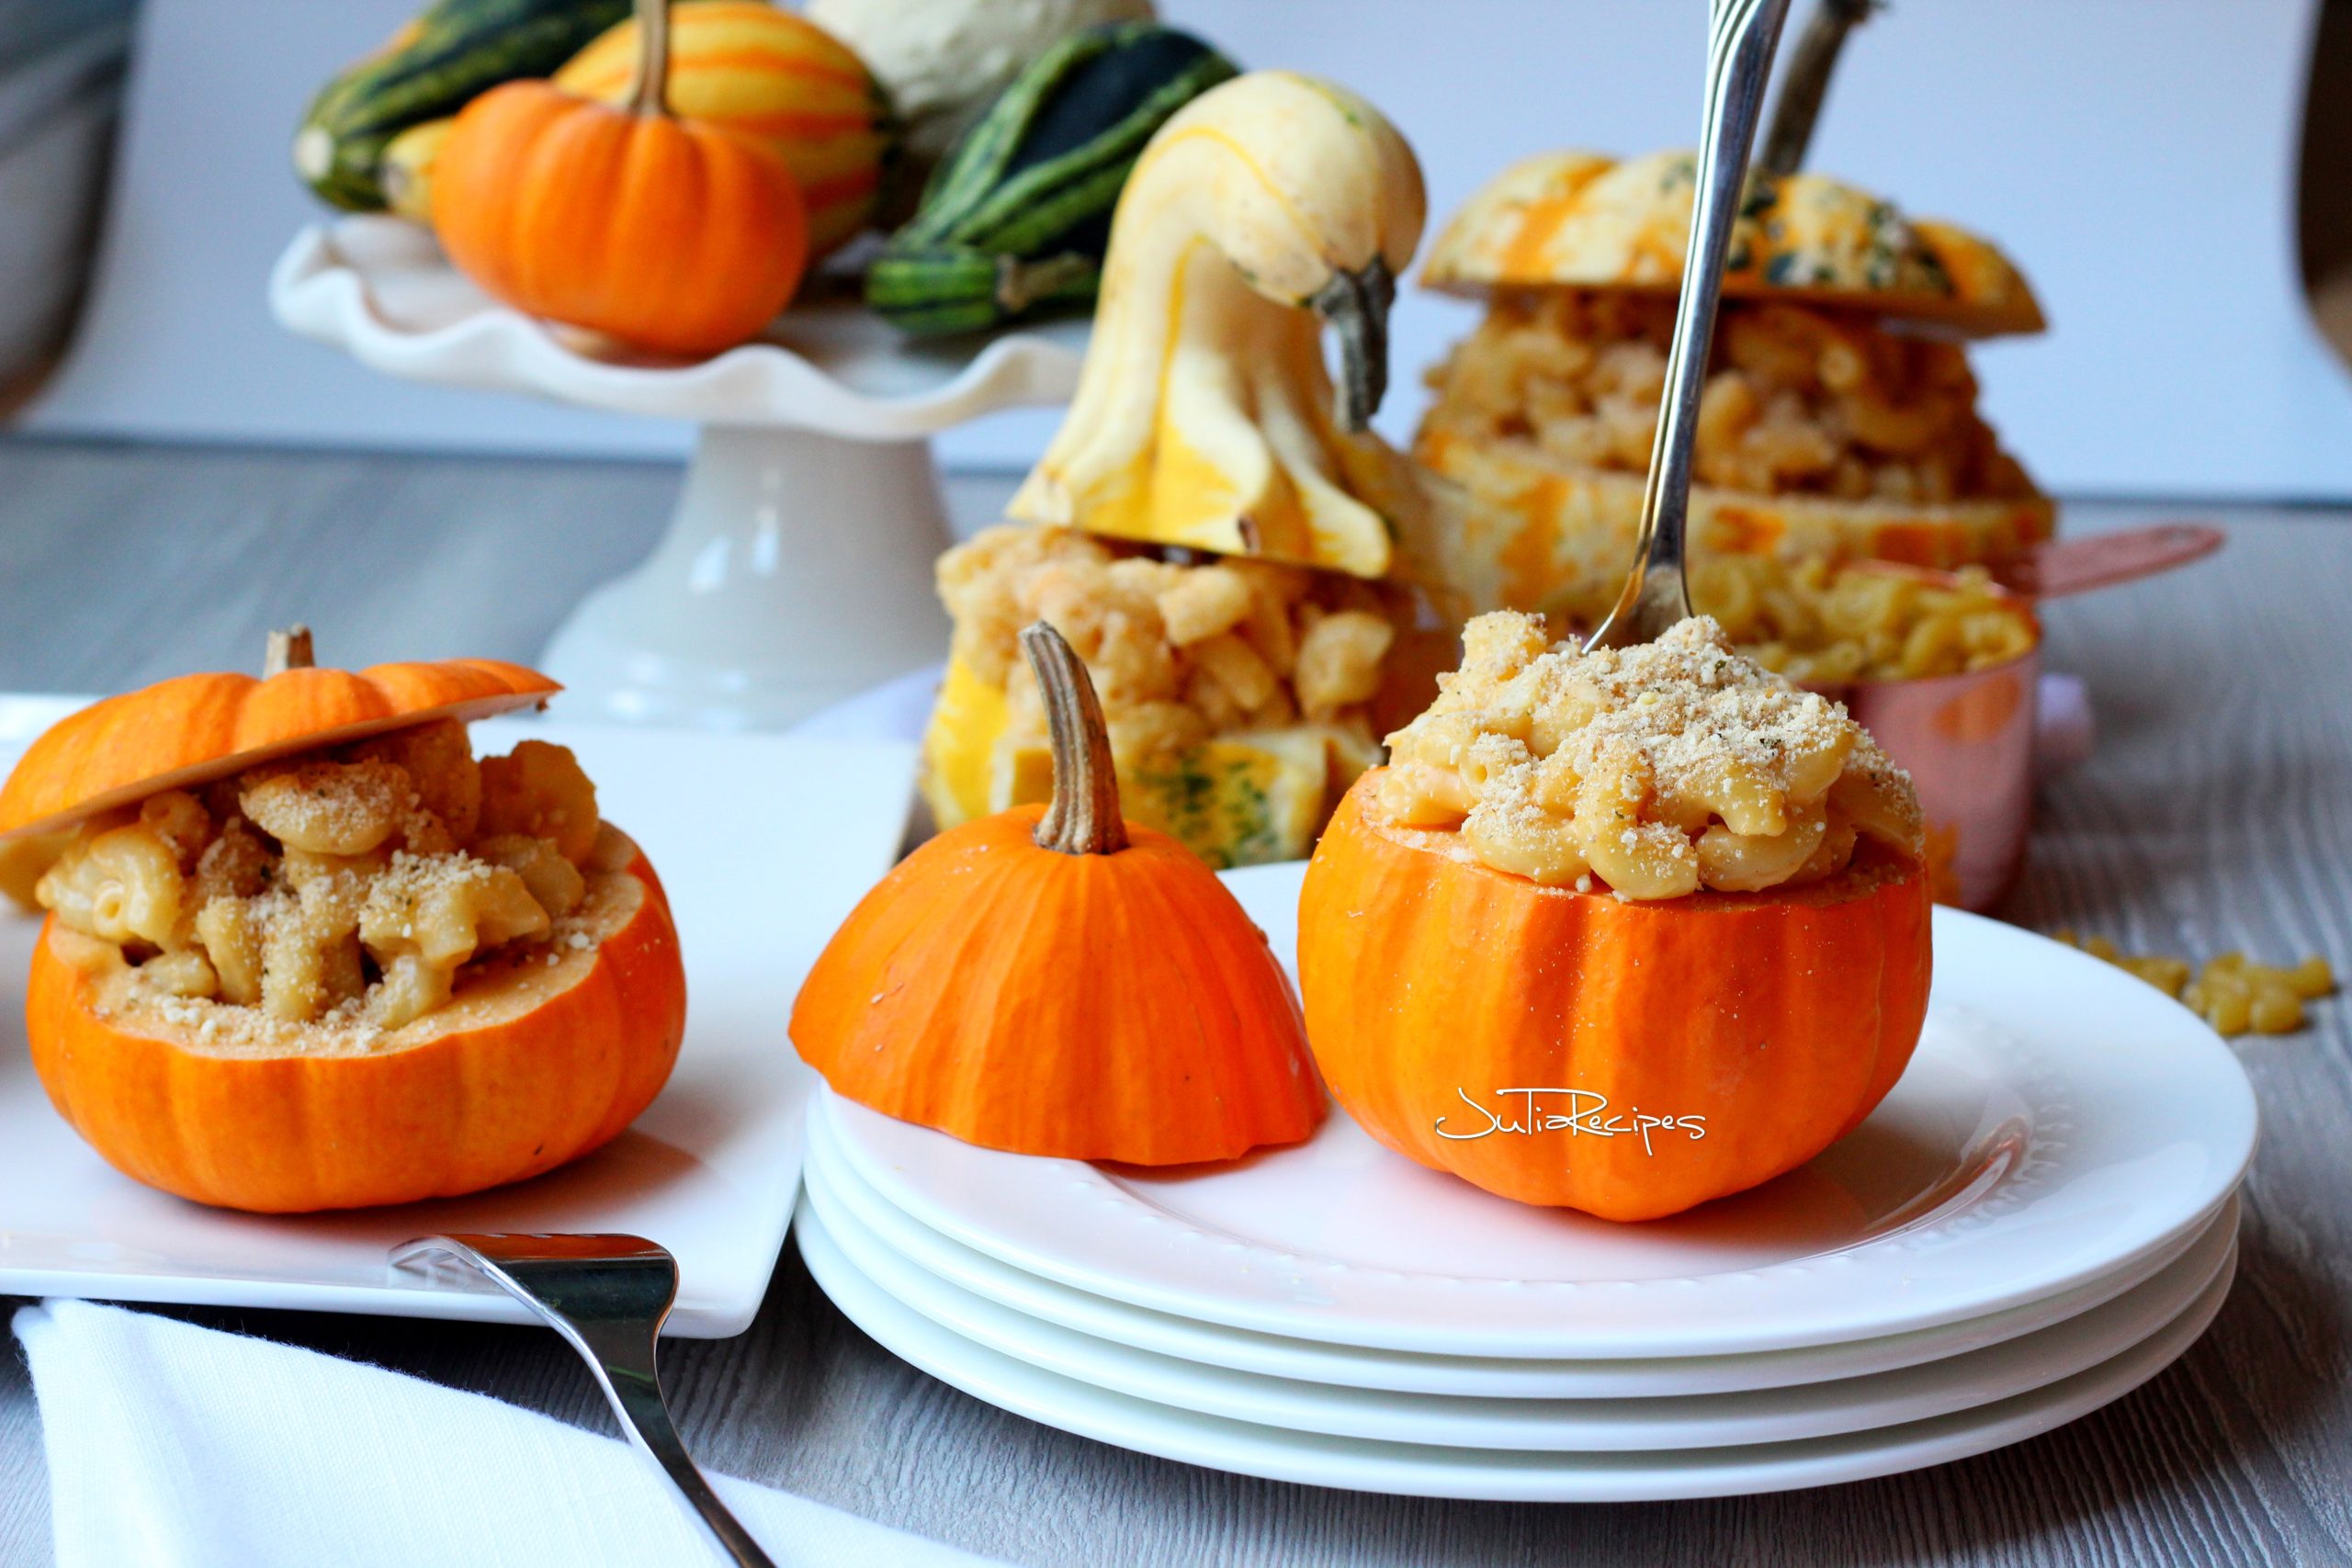 Pumpkin filled with macaroni and cheese